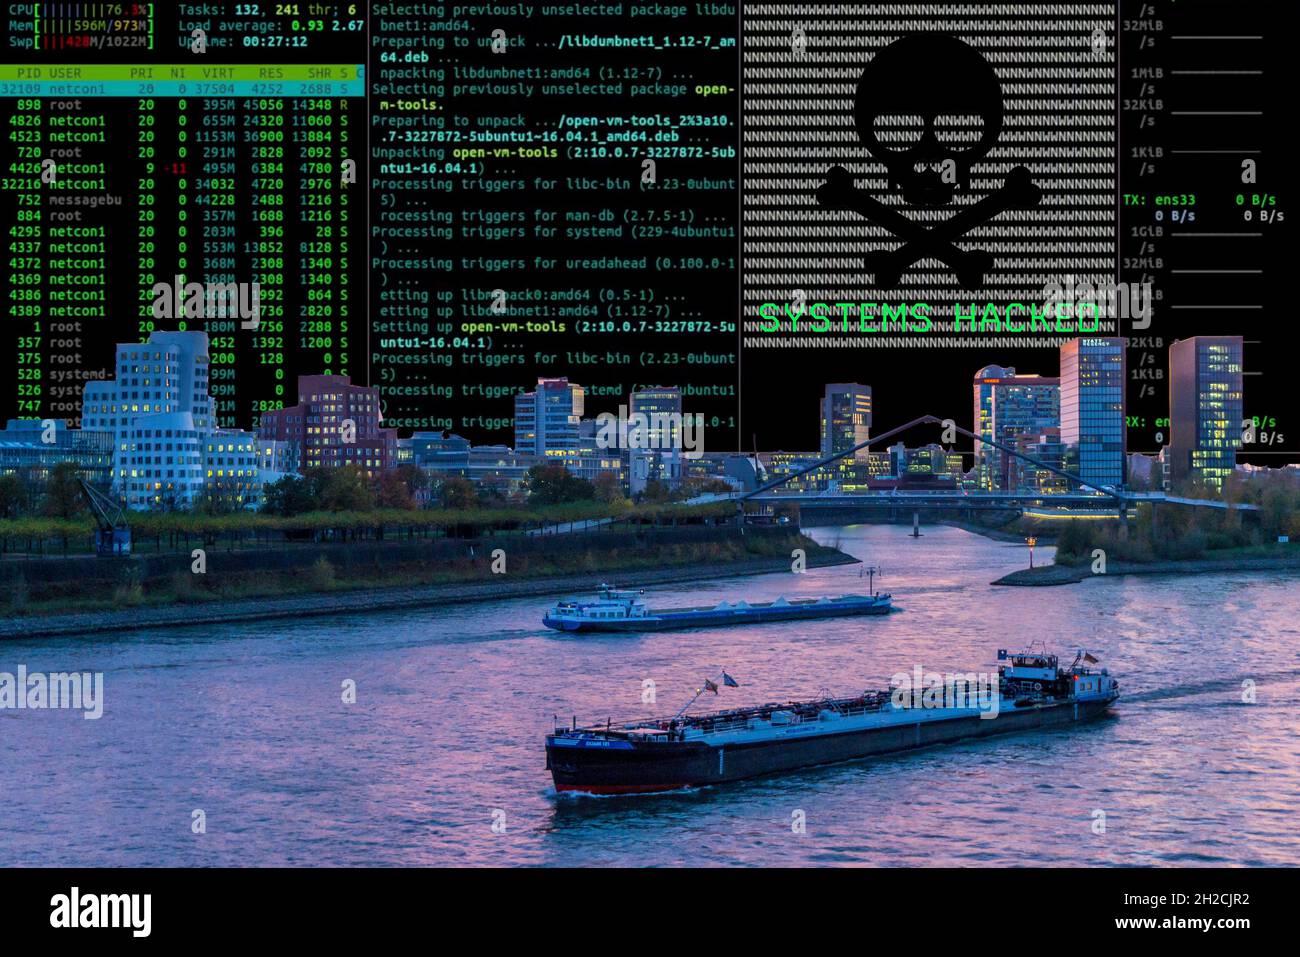 Symbolic image cyber attack, computer crime, cybercrime, computer hackers attack a city's IT infrastructure, traffic infrastructure, Düsseldorf Stock Photo